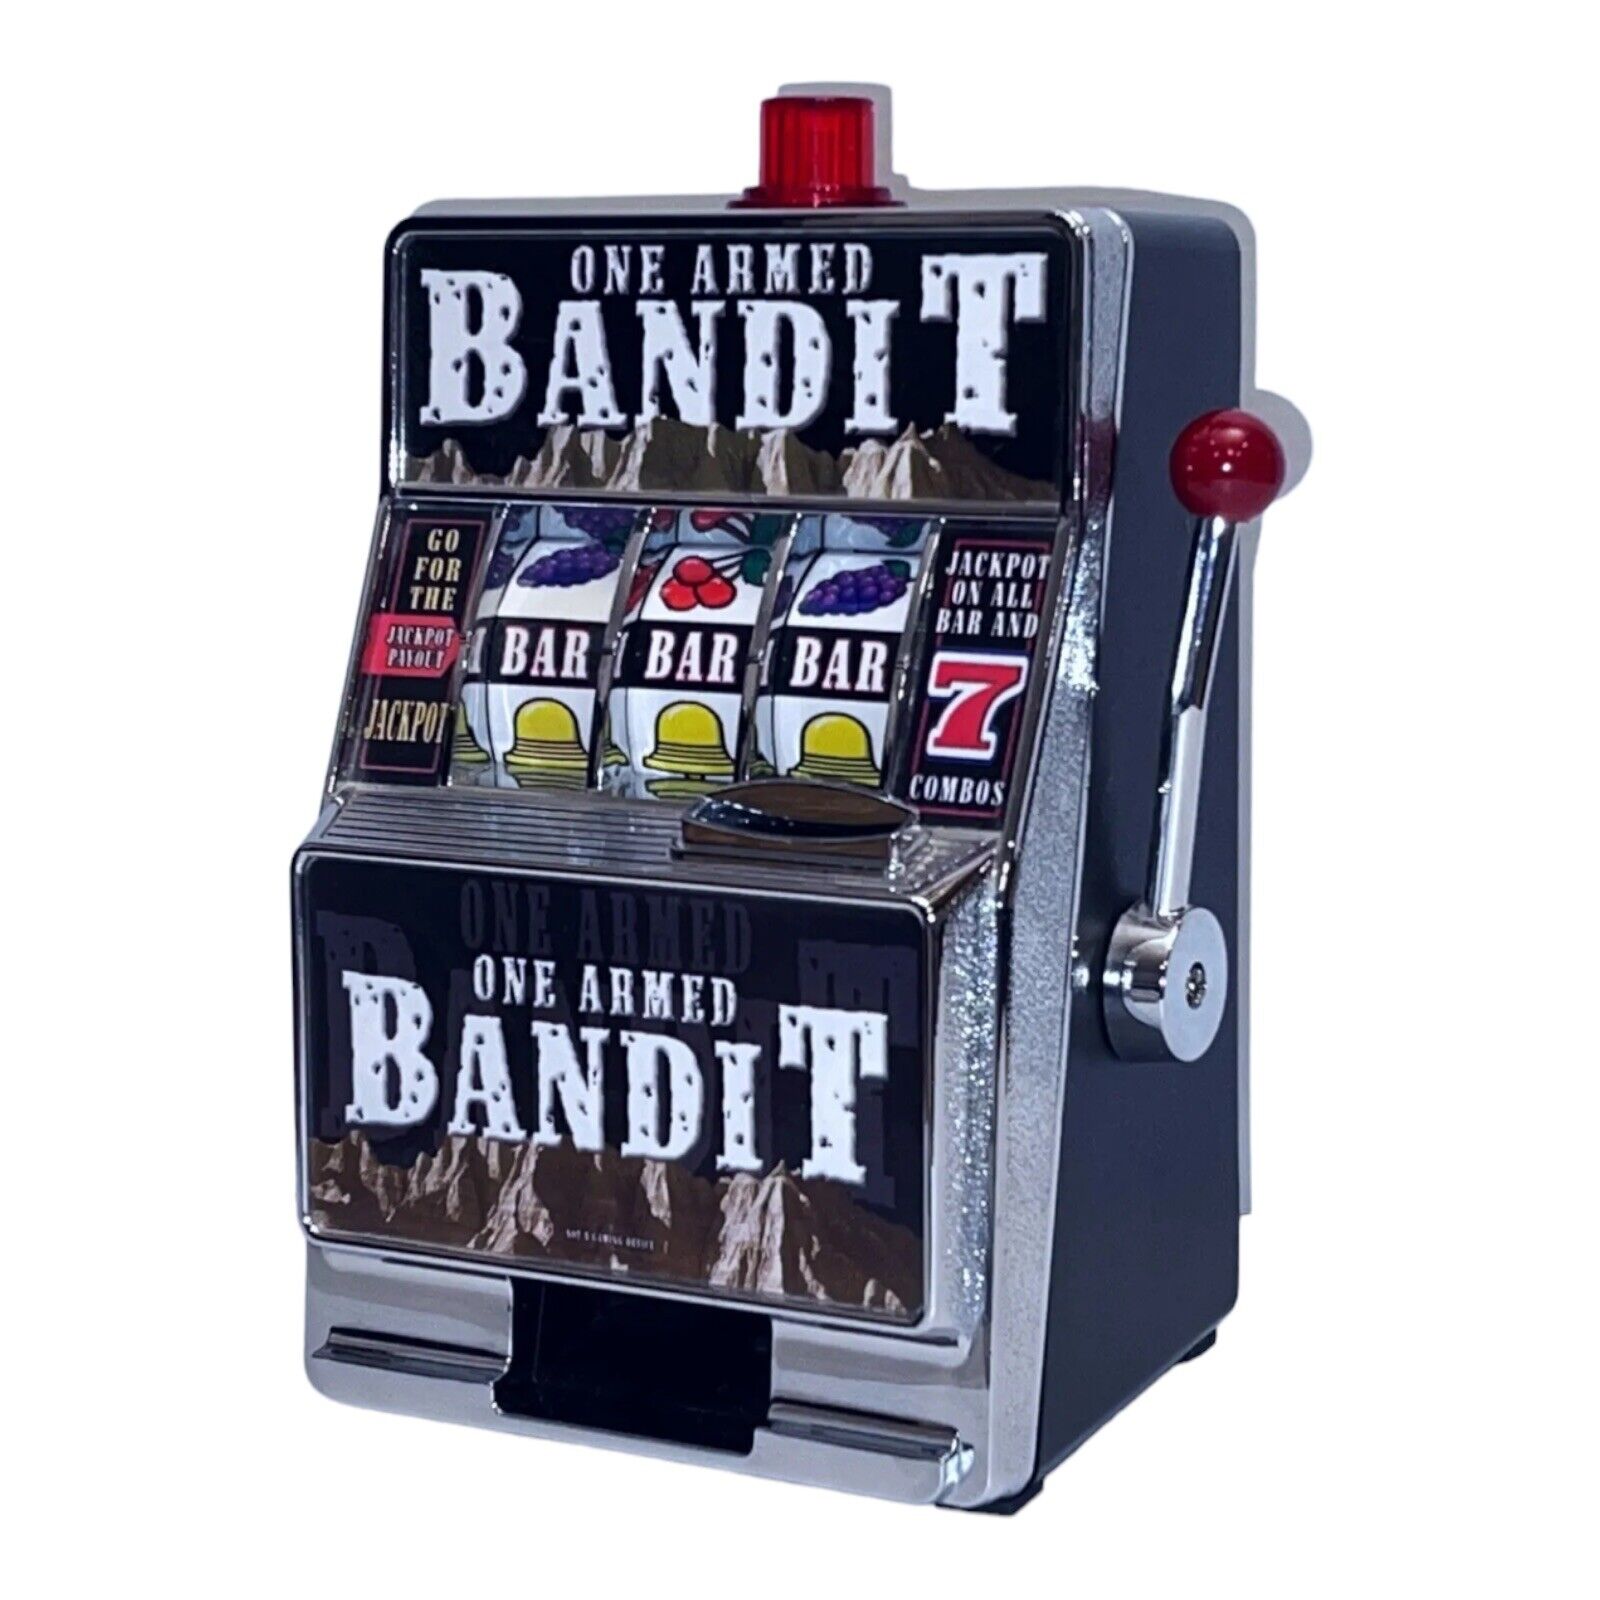 Slot Machines: The Allure of the One-Armed Bandit